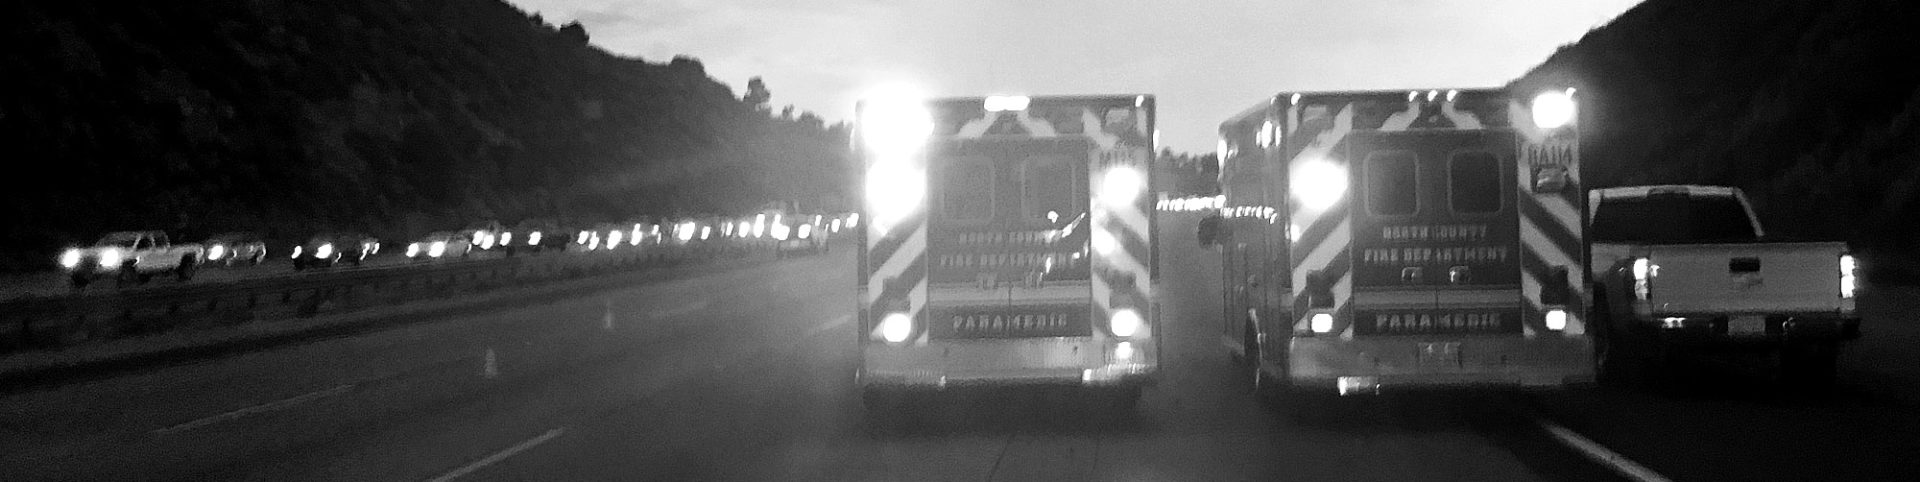 Two ambulances drive down highway with emergency lights on